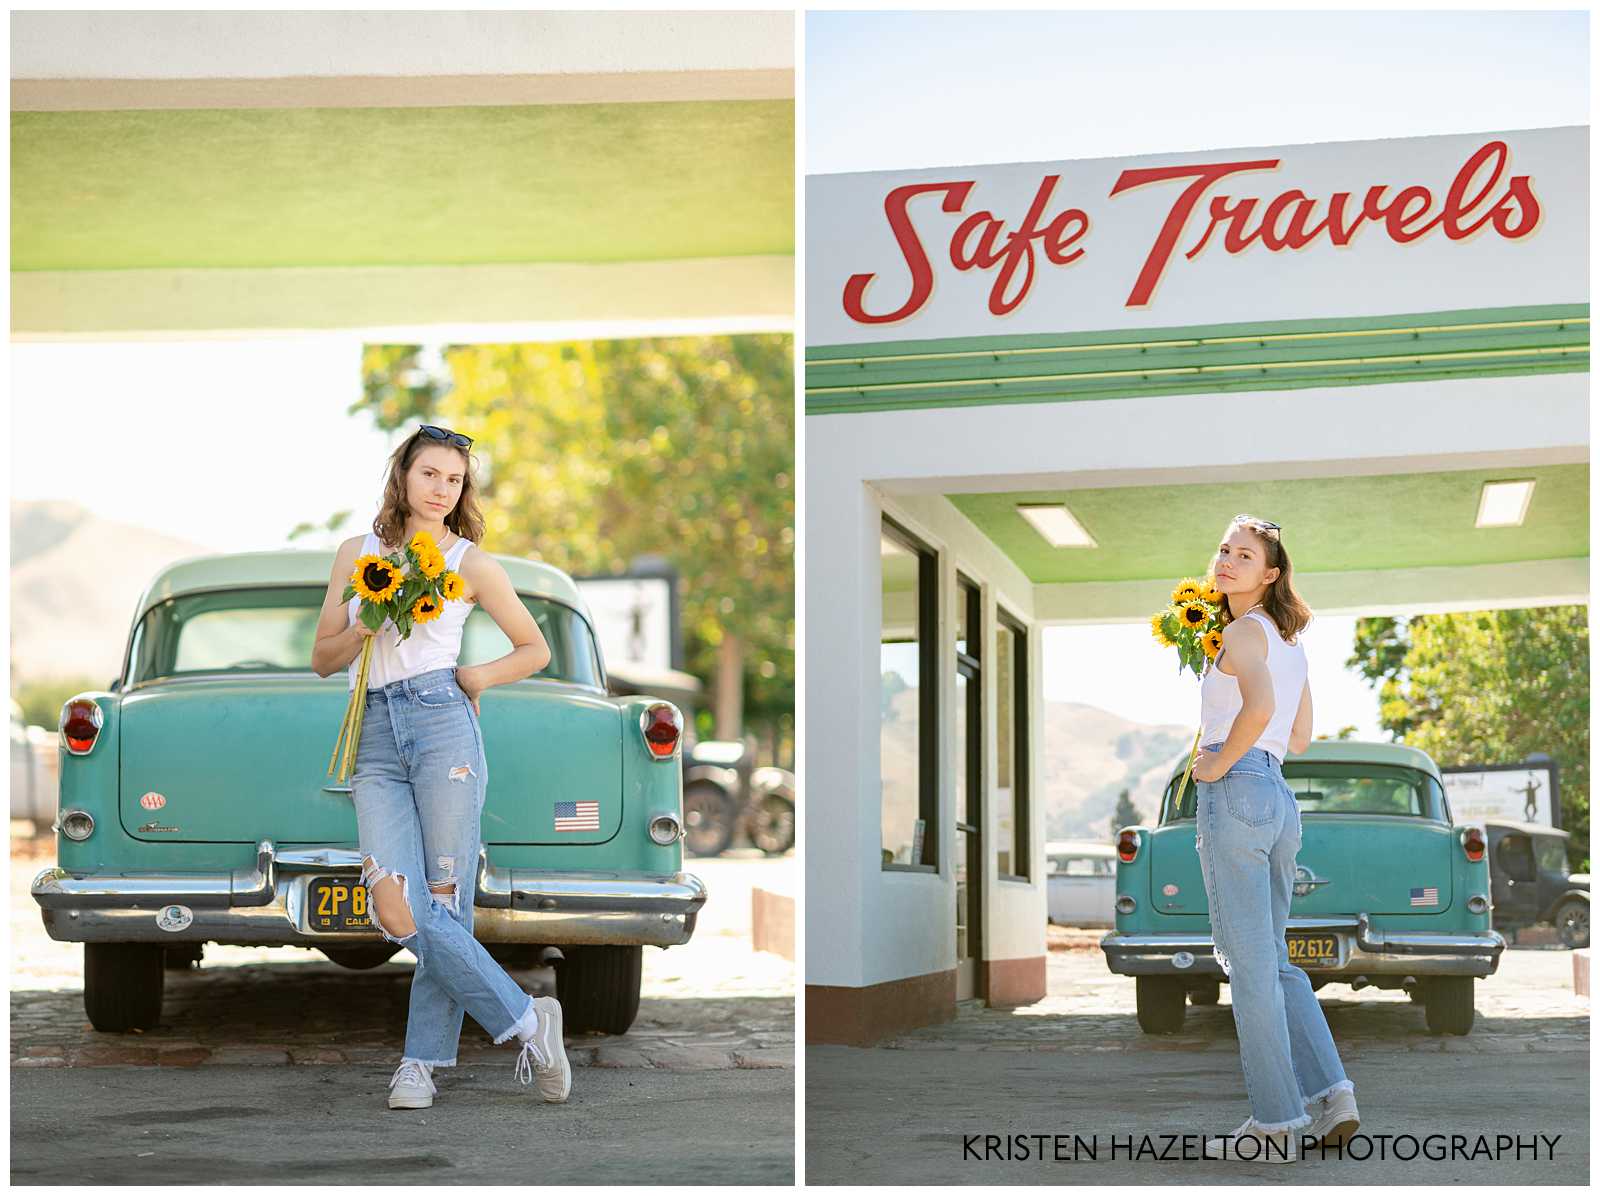 Gas station senior photos; girl wearing white tank top, blue jeans, and holding sunflowers next to a gas station sign that says "Safe Travels"